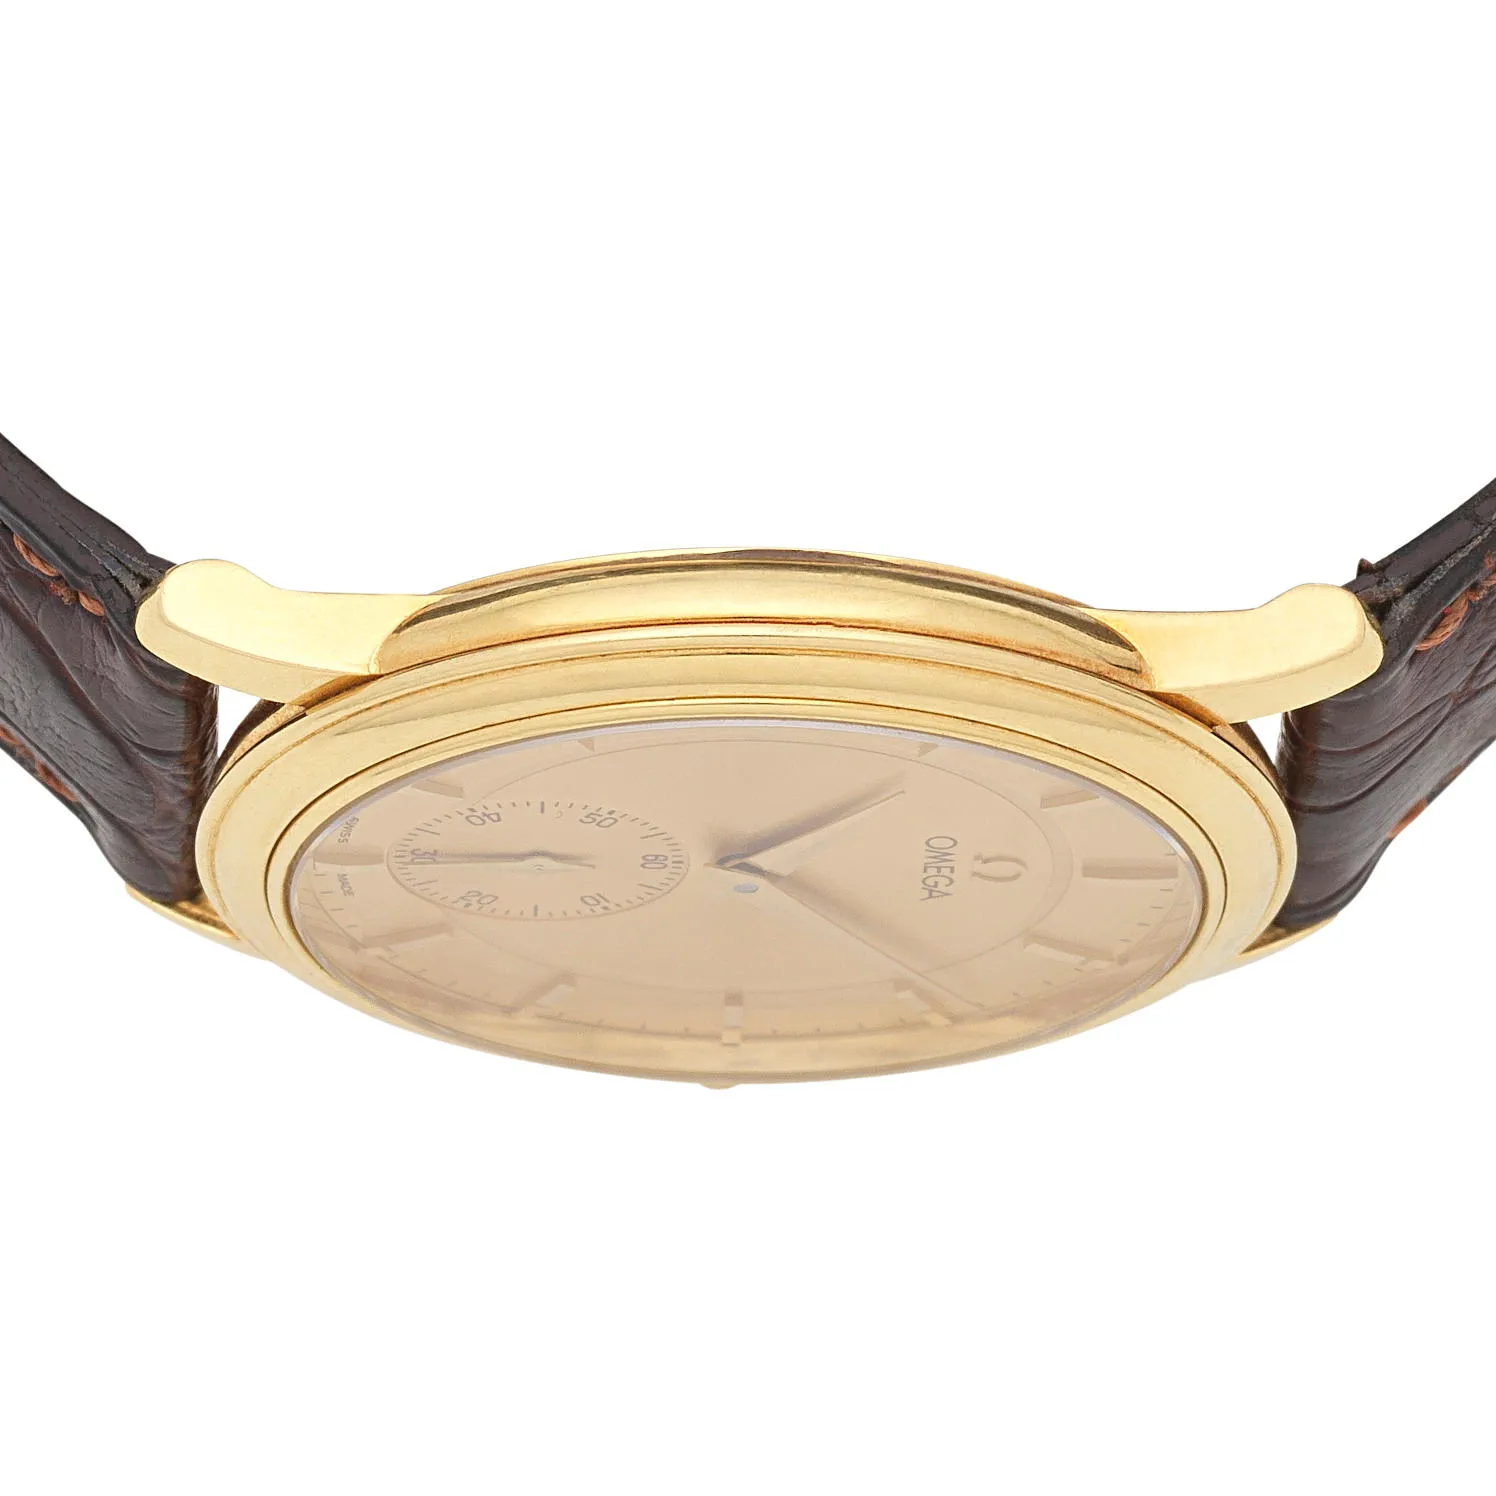 Omega De Ville 4620 34mm Yellow gold Champagne 1